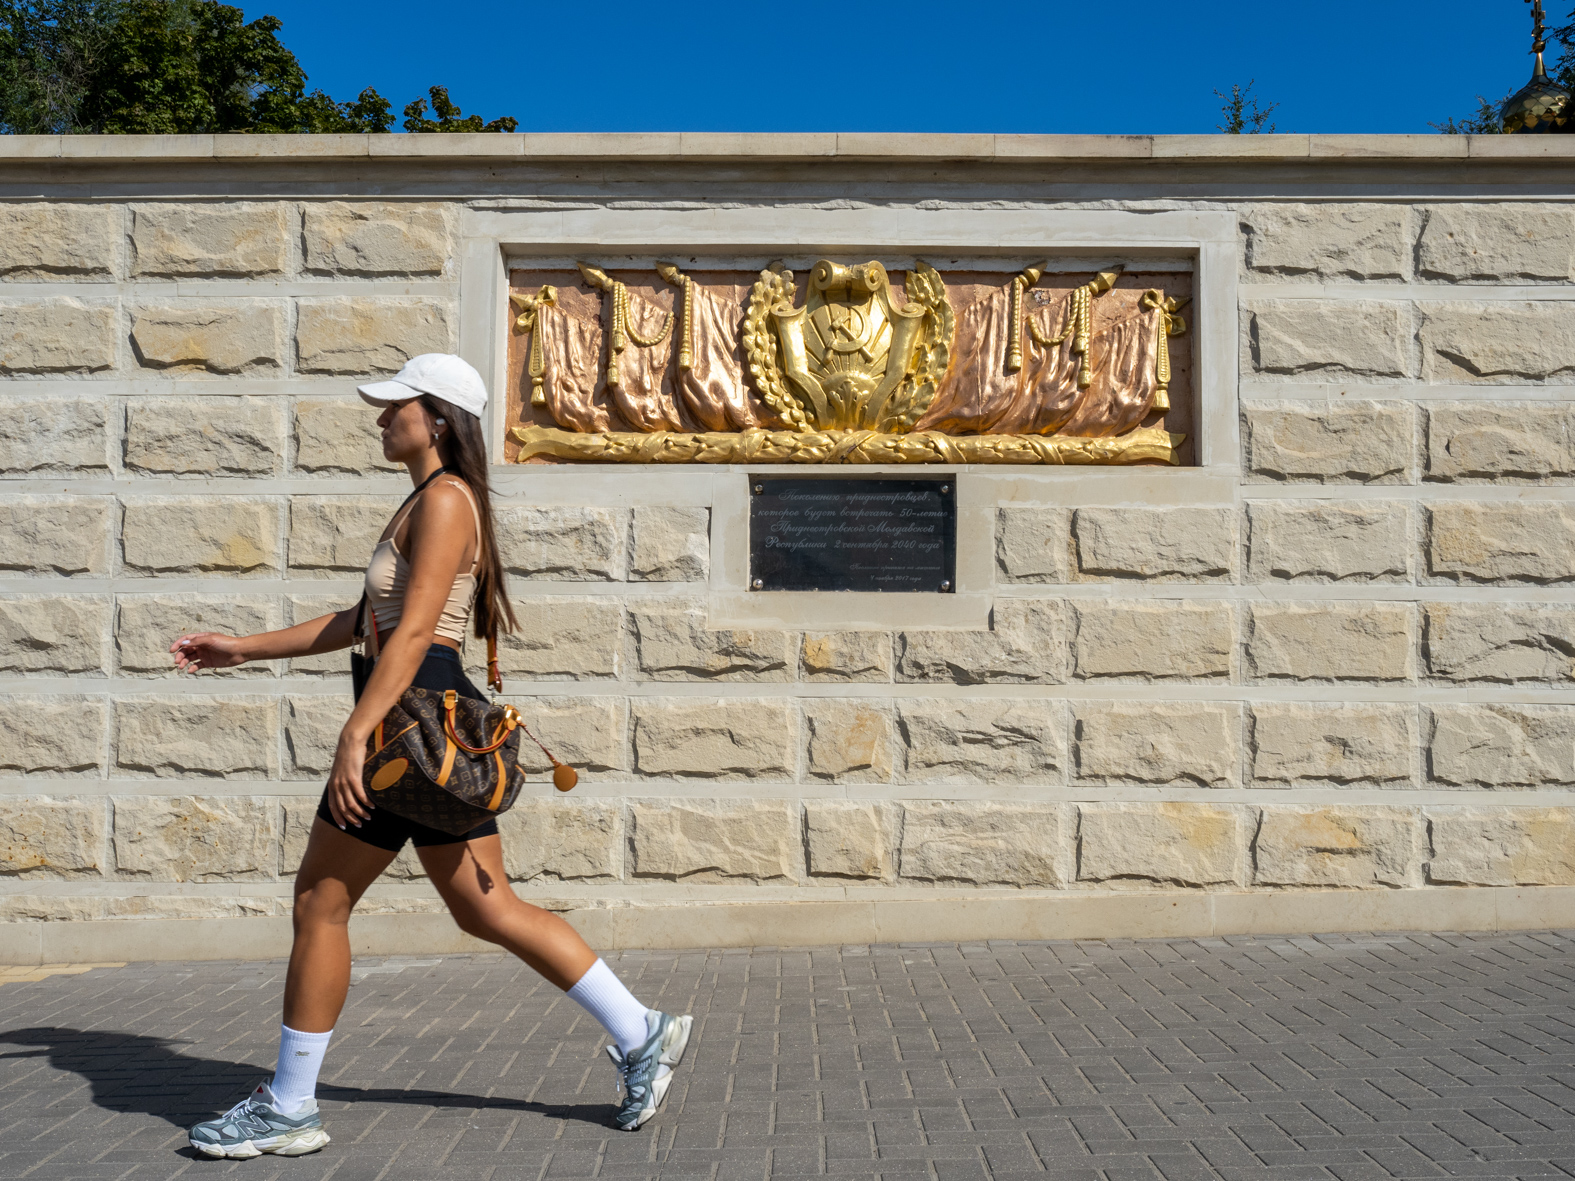 TIRASPOL, TRANSNISTRIA / MOLDOVA - SEPTEMBER 2: A woman walks past a hammer and sickle, part of a memorial on 25 October Street on September 2, 2023 in Tiraspol, Moldova (Pridnestrovian Moldavian Republic). Tiraspol is the capital of Transnistria situated on the eastern bank of the Dniester River. Republic Day is the main state holiday. Transnistria broke away from Moldova in 1990 and is unrecognised by the international community as an independent state. The de-facto administration of Transnistria is supported economically, diplomatically, and militarily by Russia, which is believed to have 1,500 soldiers stationed there. (Photo by Peter Dench/Getty Images)